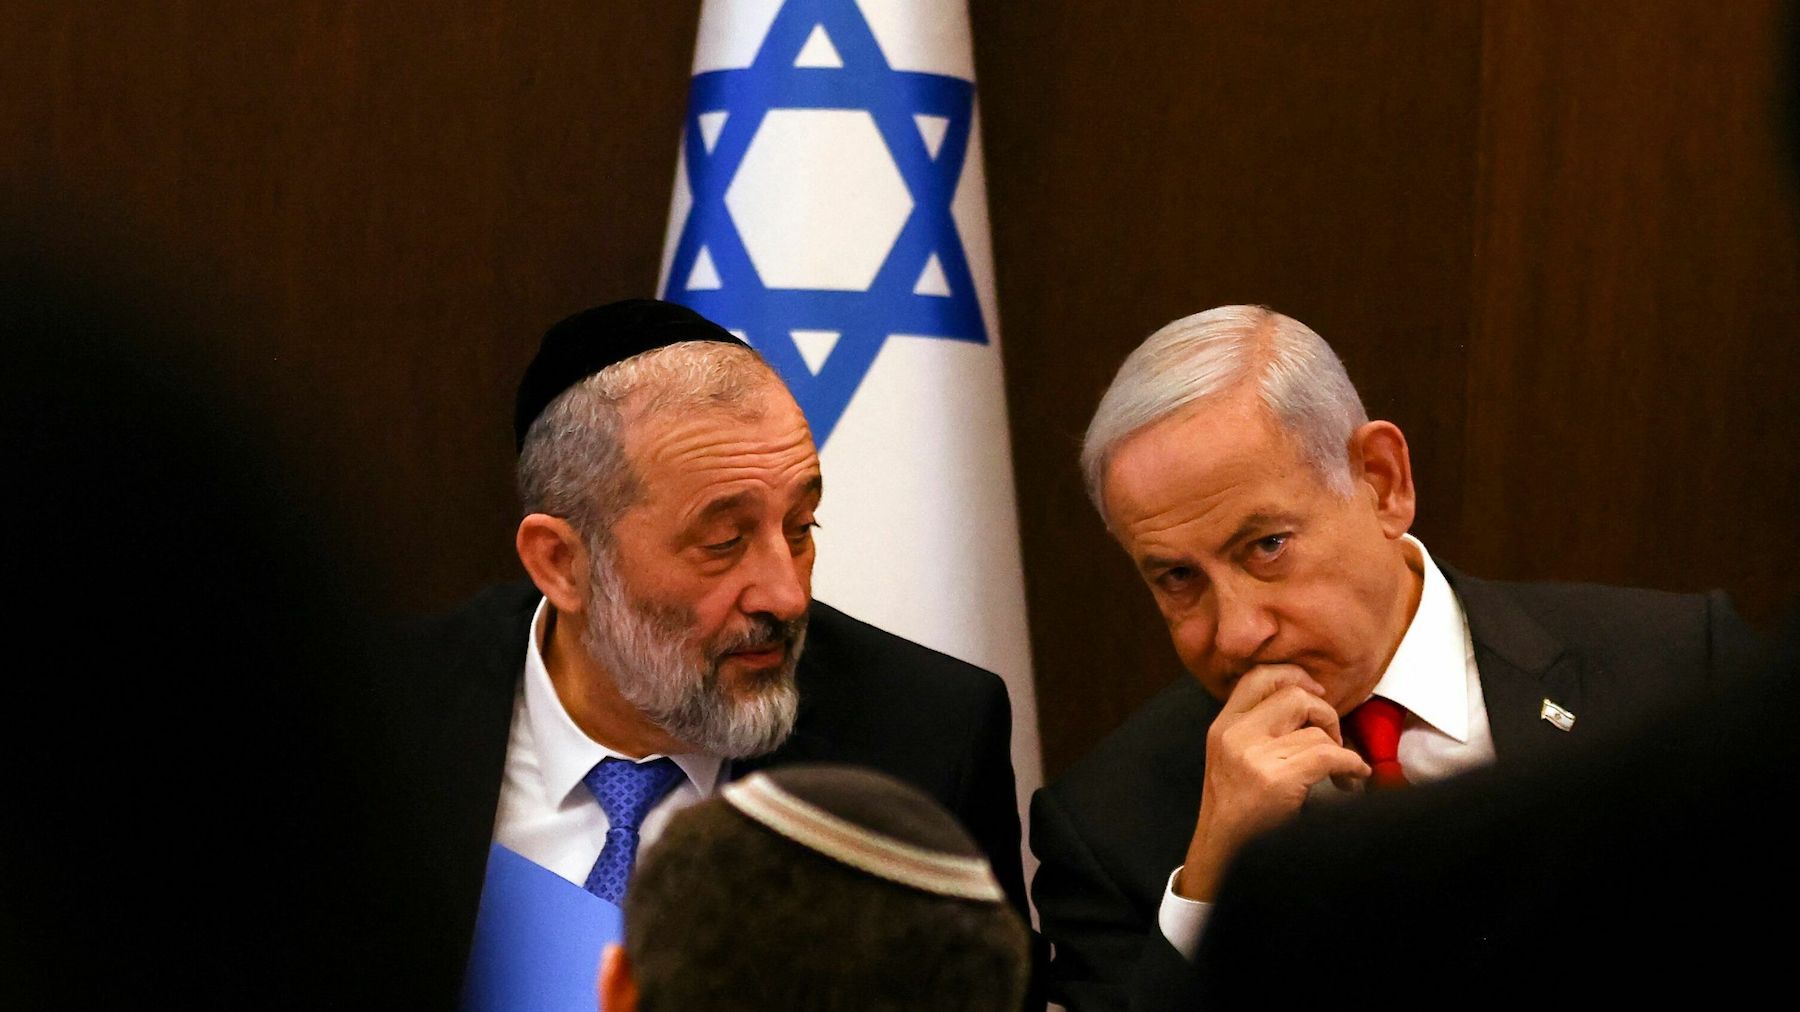 shared-post-the-brewing-israeli-civil-war-does-the-us-have-a-hand